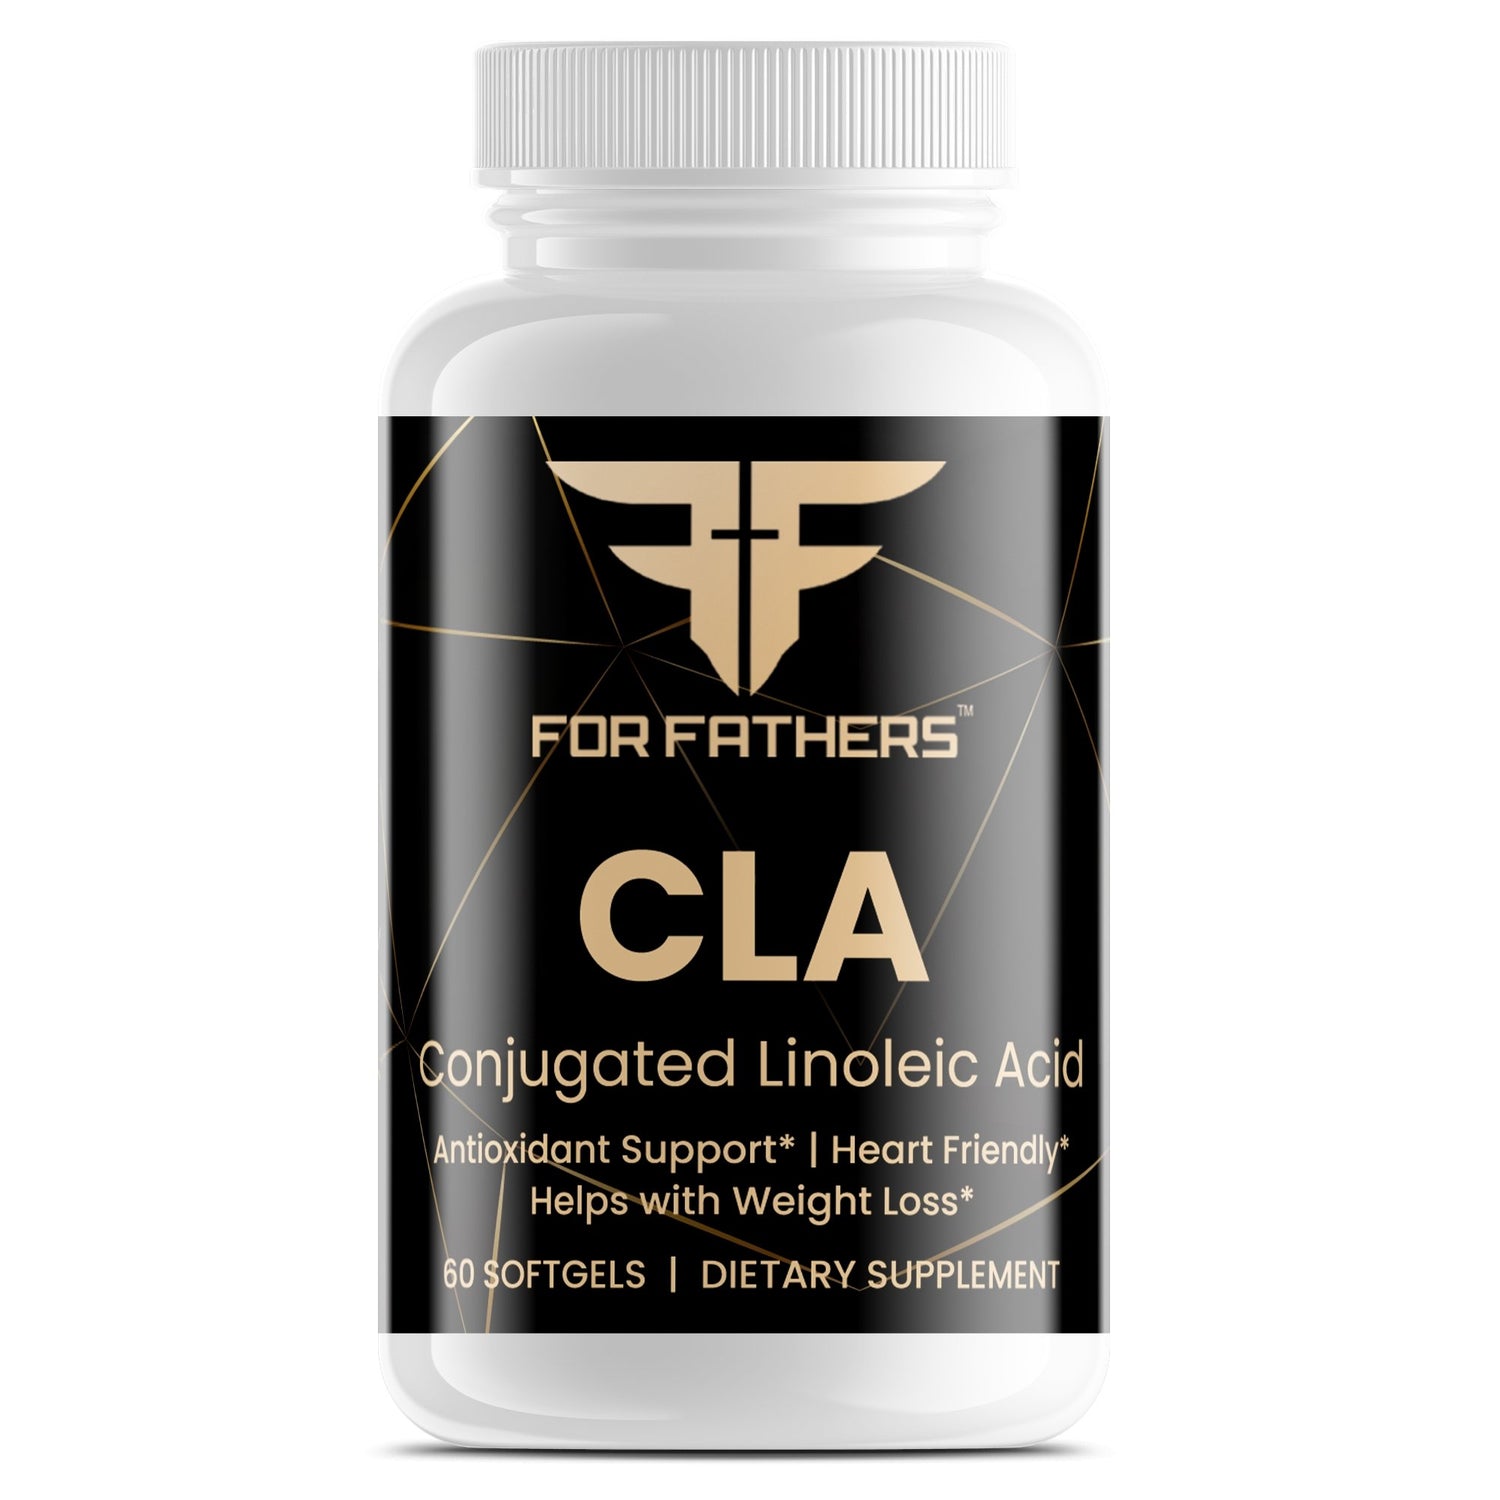 CLA Softgels - Conjugated Linoleic Acid - 1000mg - For Fathers Fitness